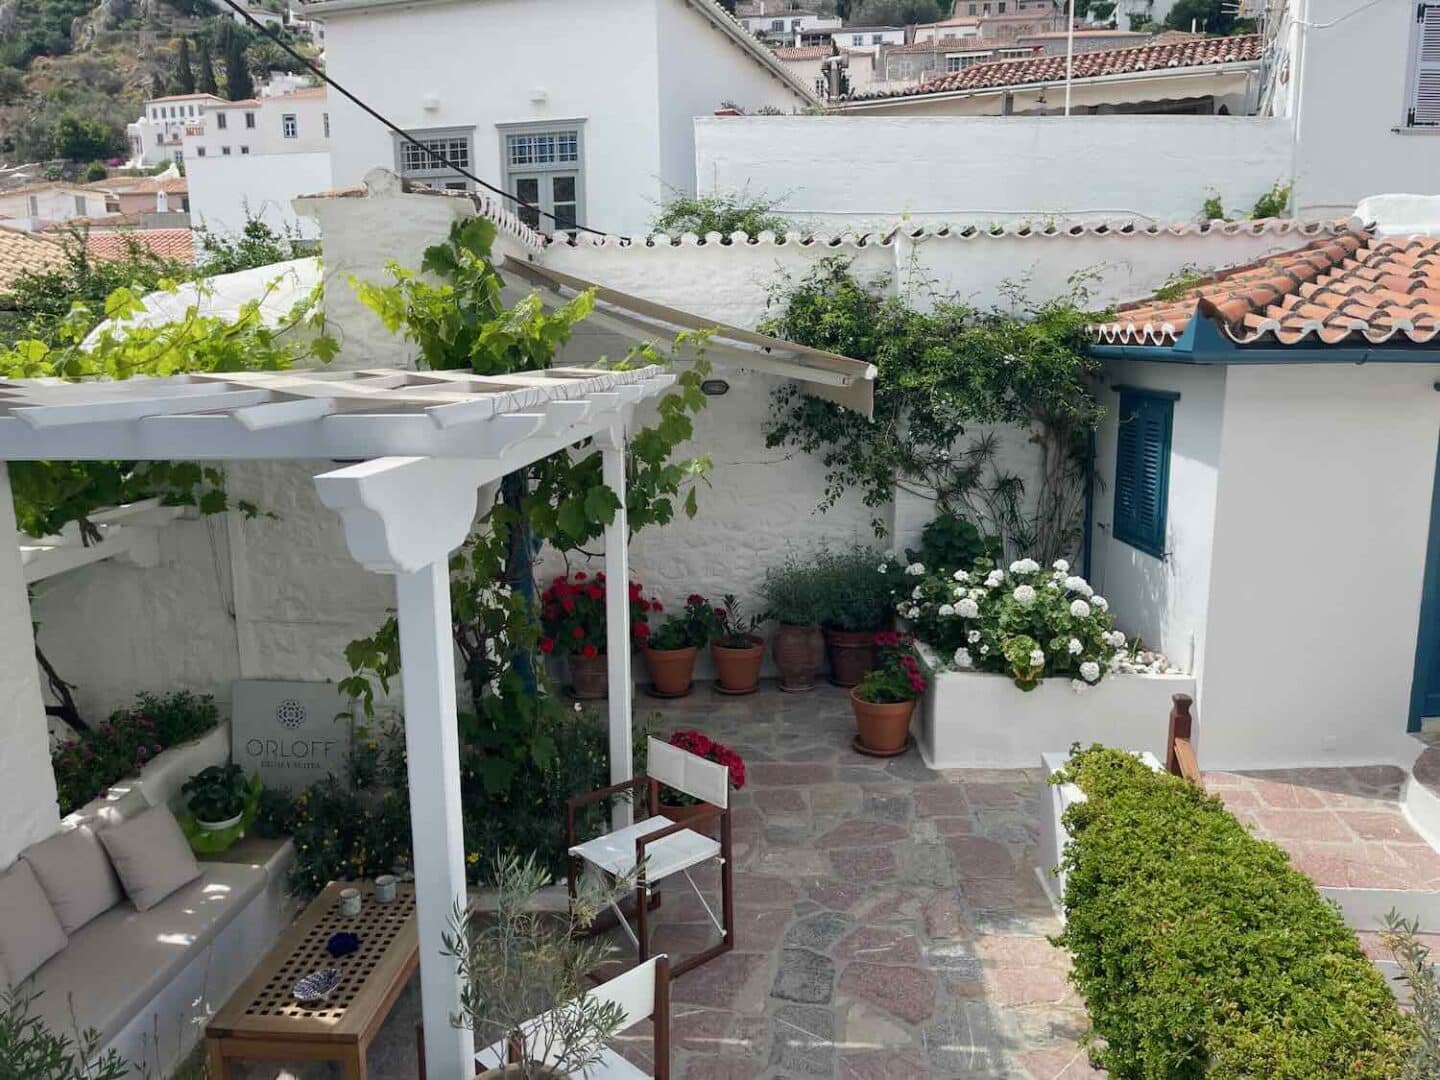 Charming patio of Orloff in Hydra, lined with flowering pots and a pergola, providing a peaceful spot for guests to unwind amidst the island's beauty.